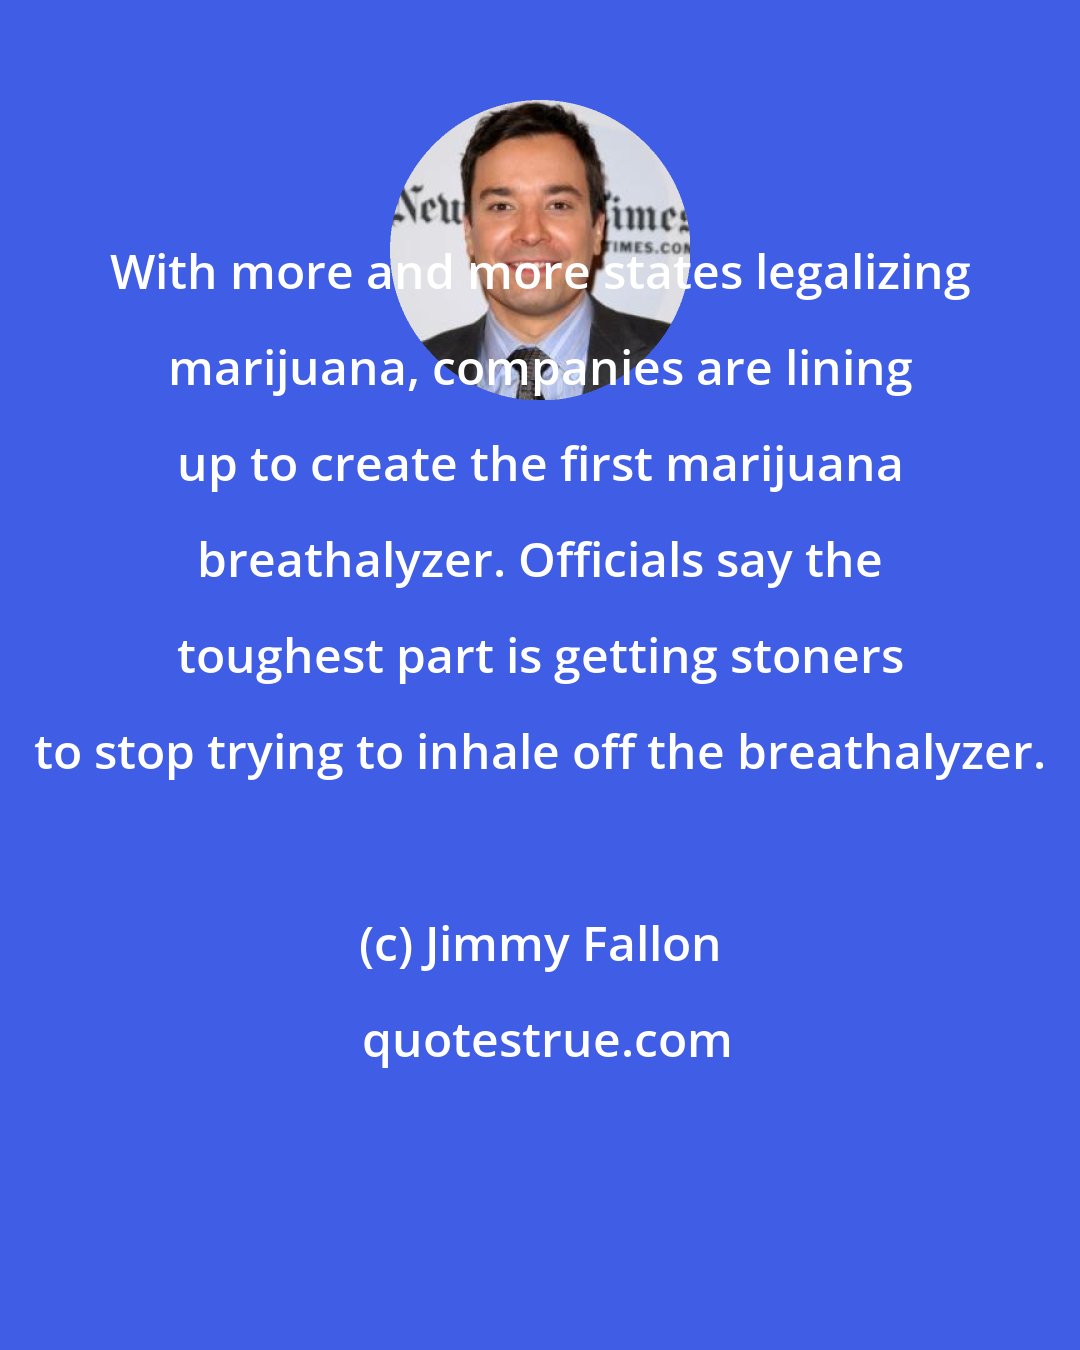 Jimmy Fallon: With more and more states legalizing marijuana, companies are lining up to create the first marijuana breathalyzer. Officials say the toughest part is getting stoners to stop trying to inhale off the breathalyzer.